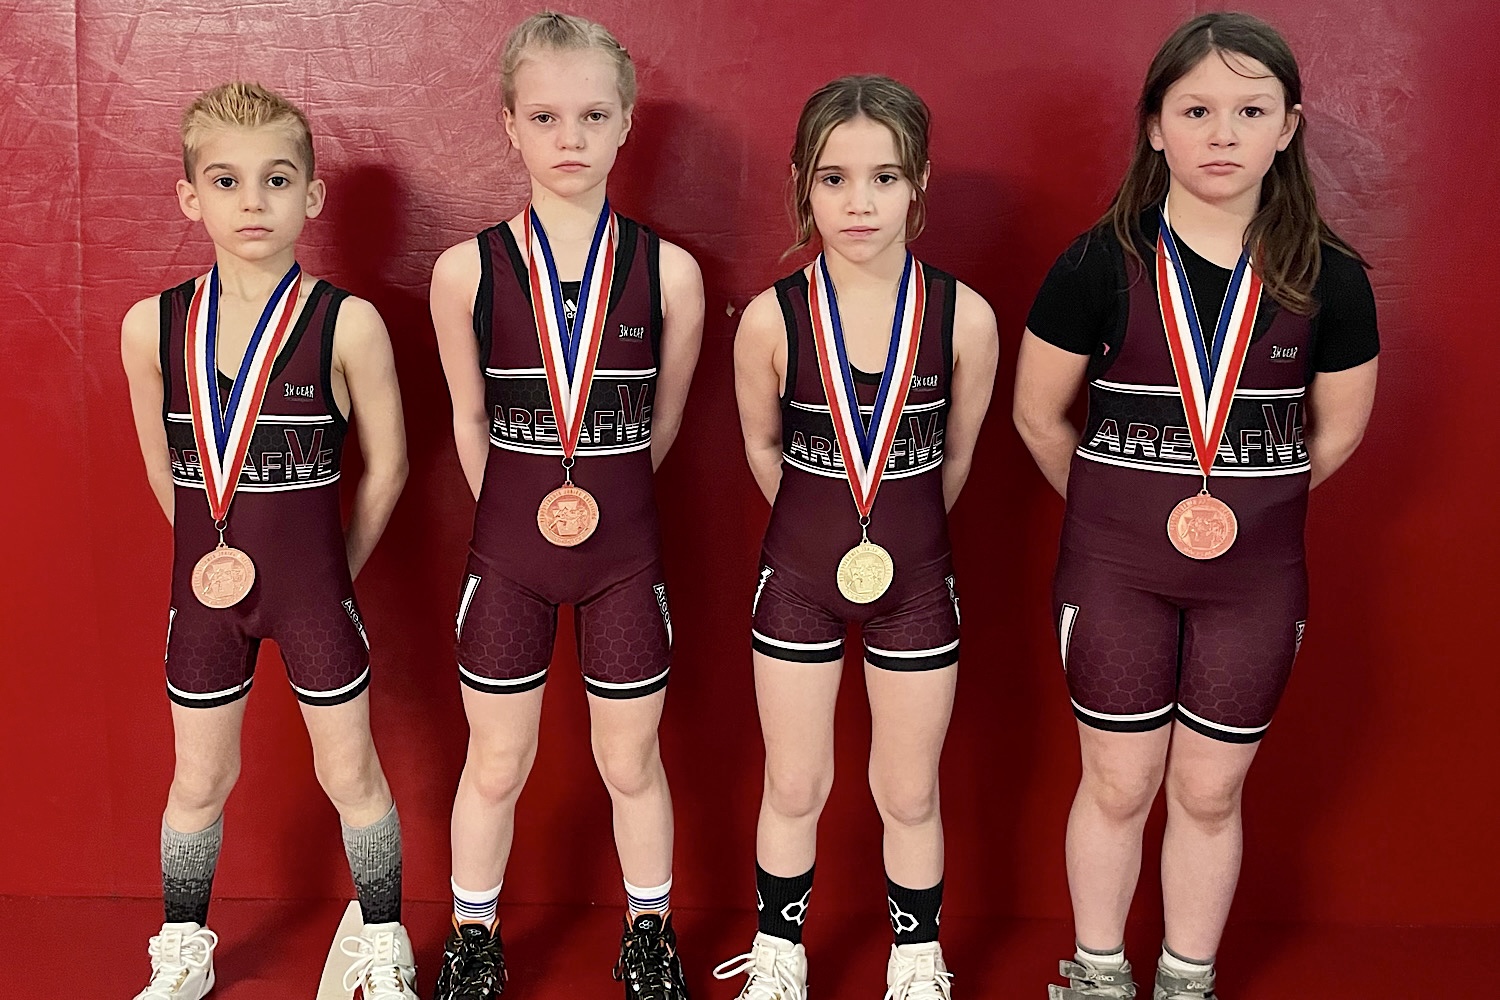 Four From Mat Hog Wrestling Club in Punxsutawney Earn Medals at PJW Championships